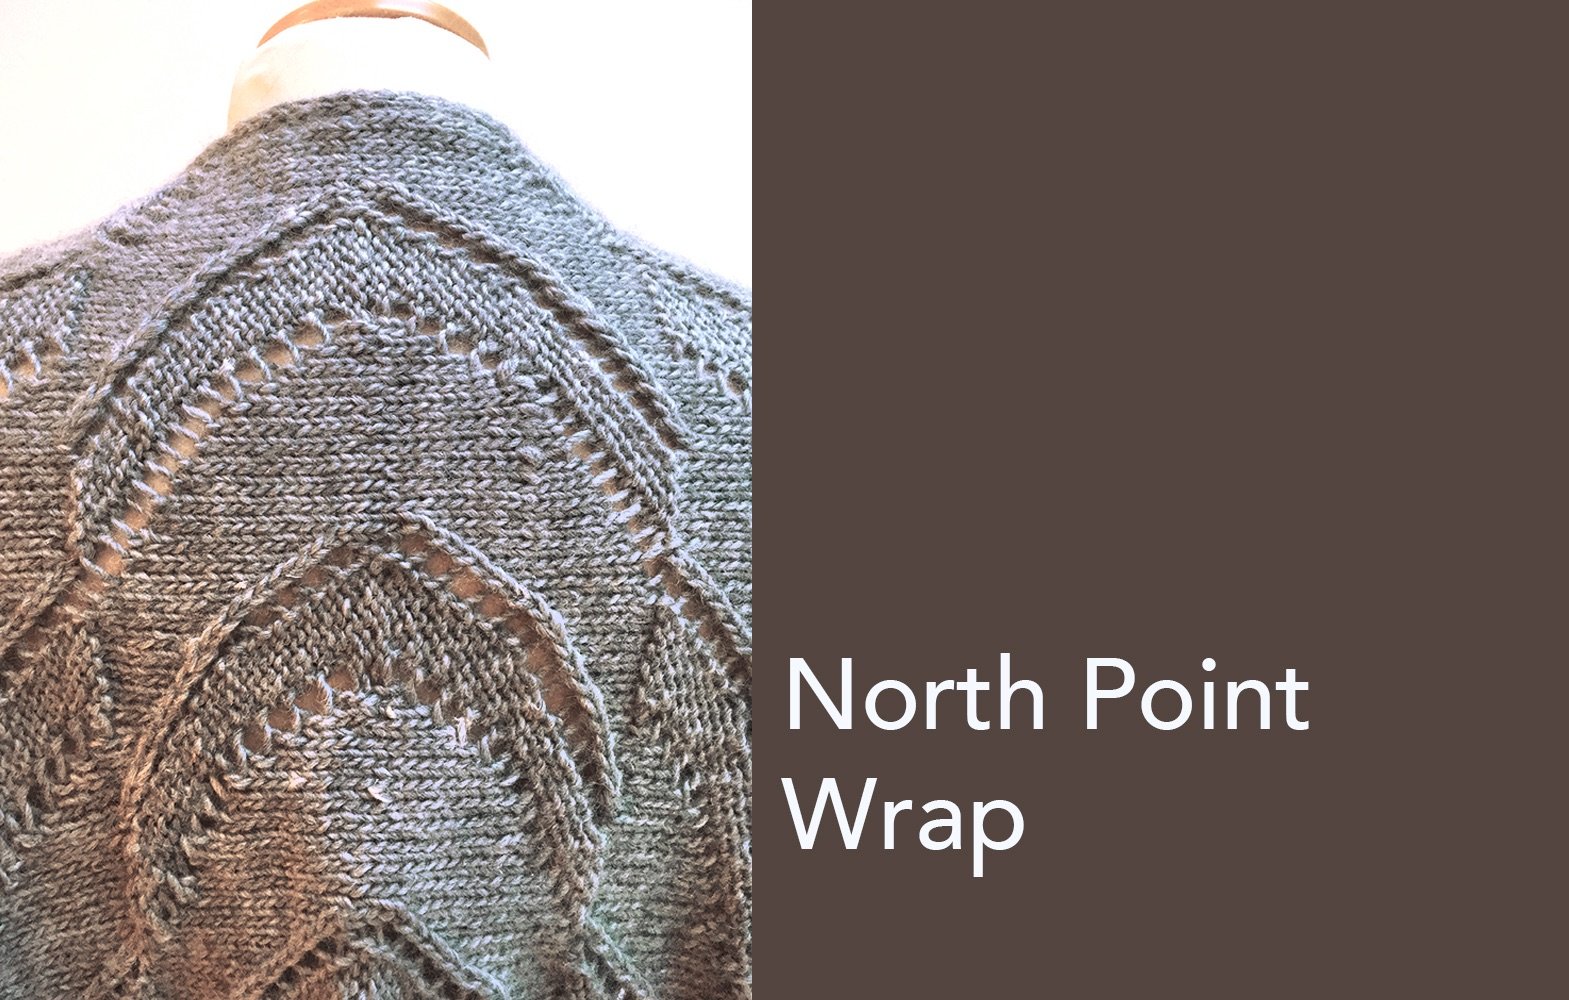 North Point Wrap gallery image.jpg